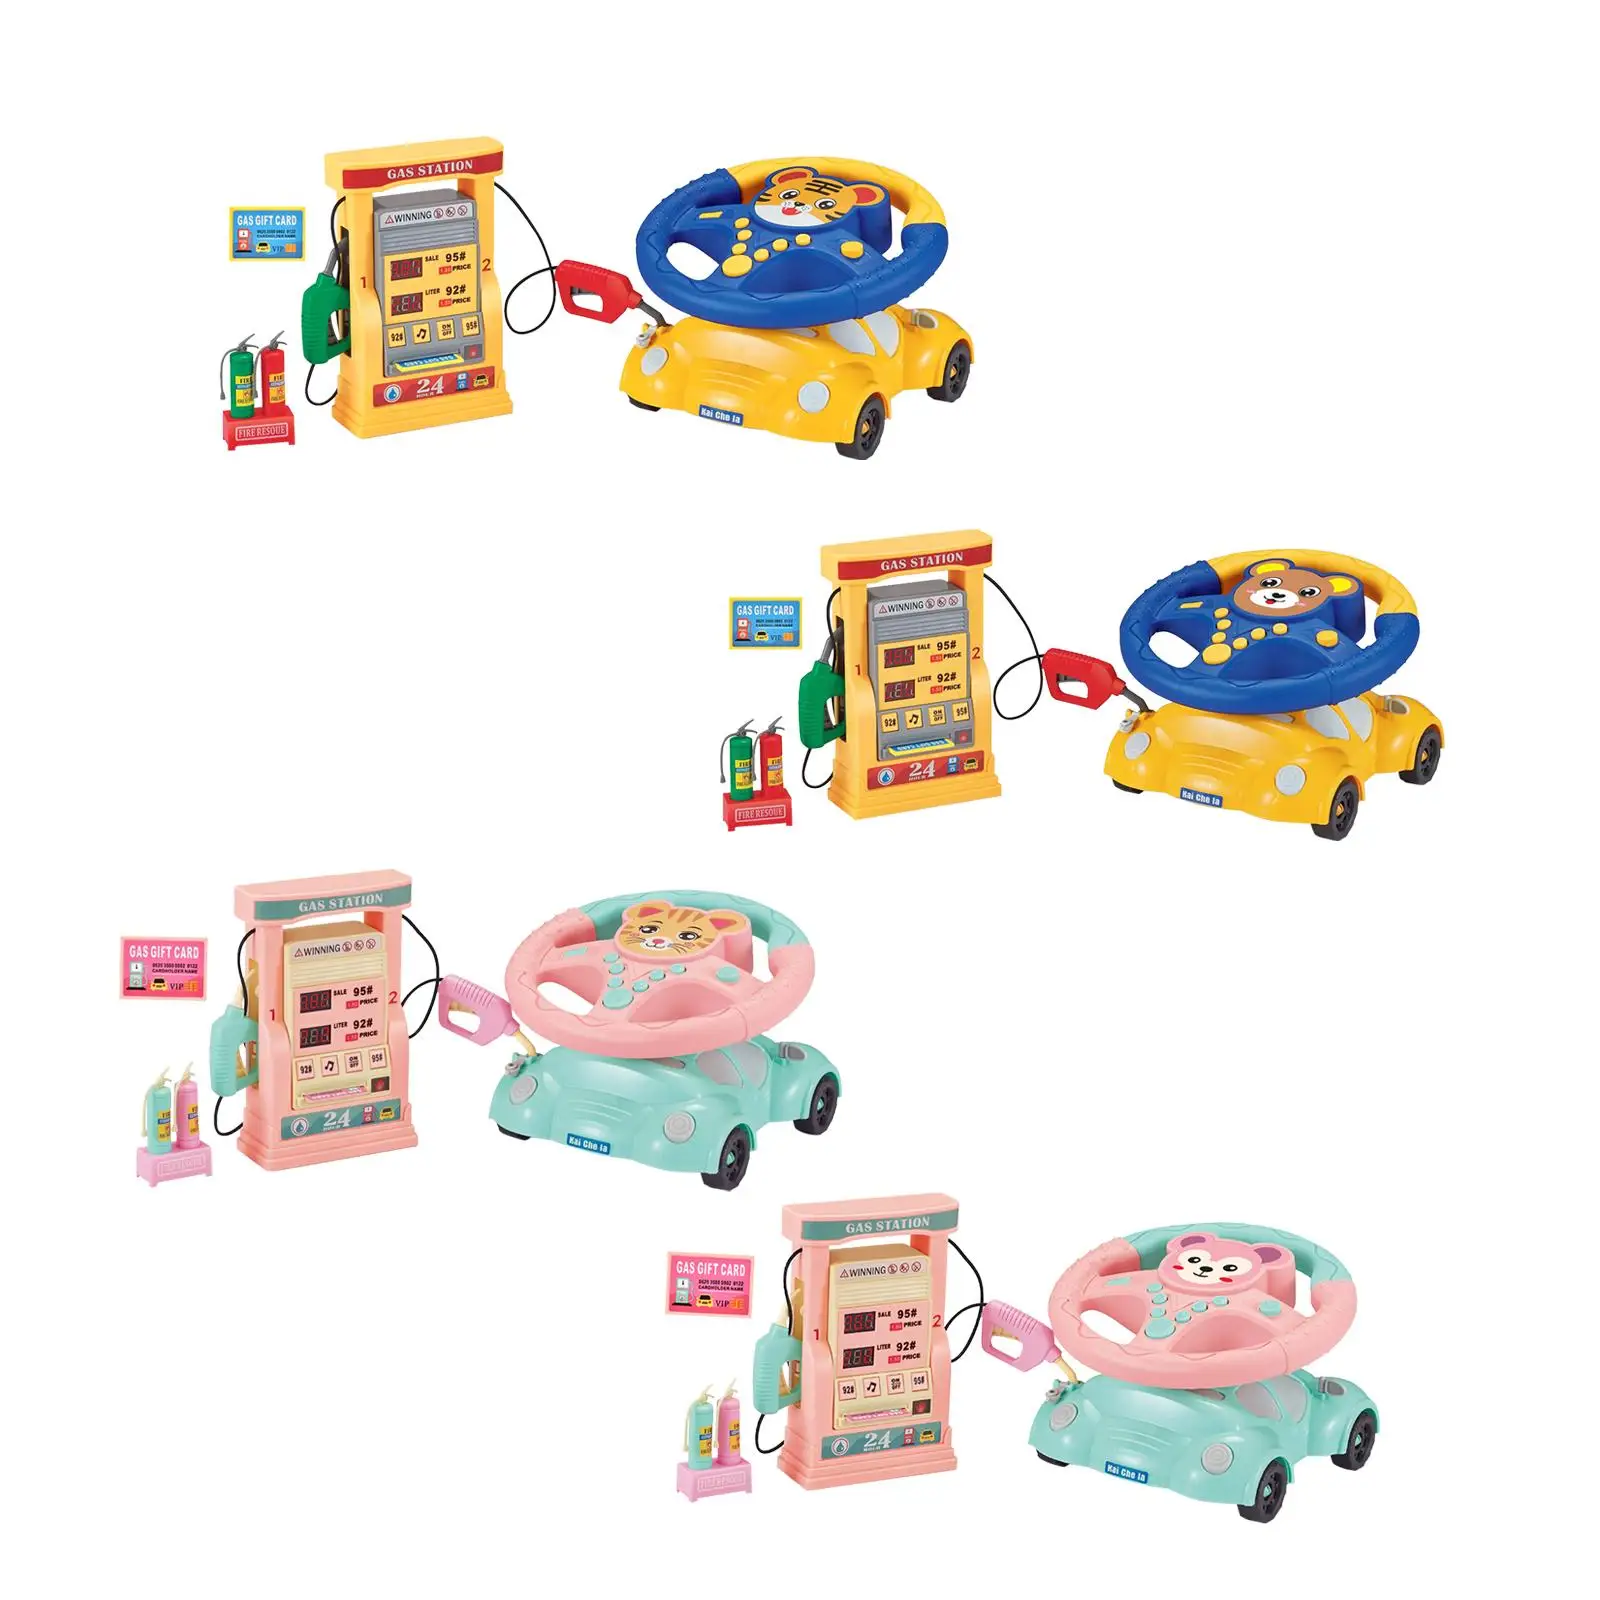 Simulation Gas Station Toy Pretend Play Interesting Sound for Creative Gifts